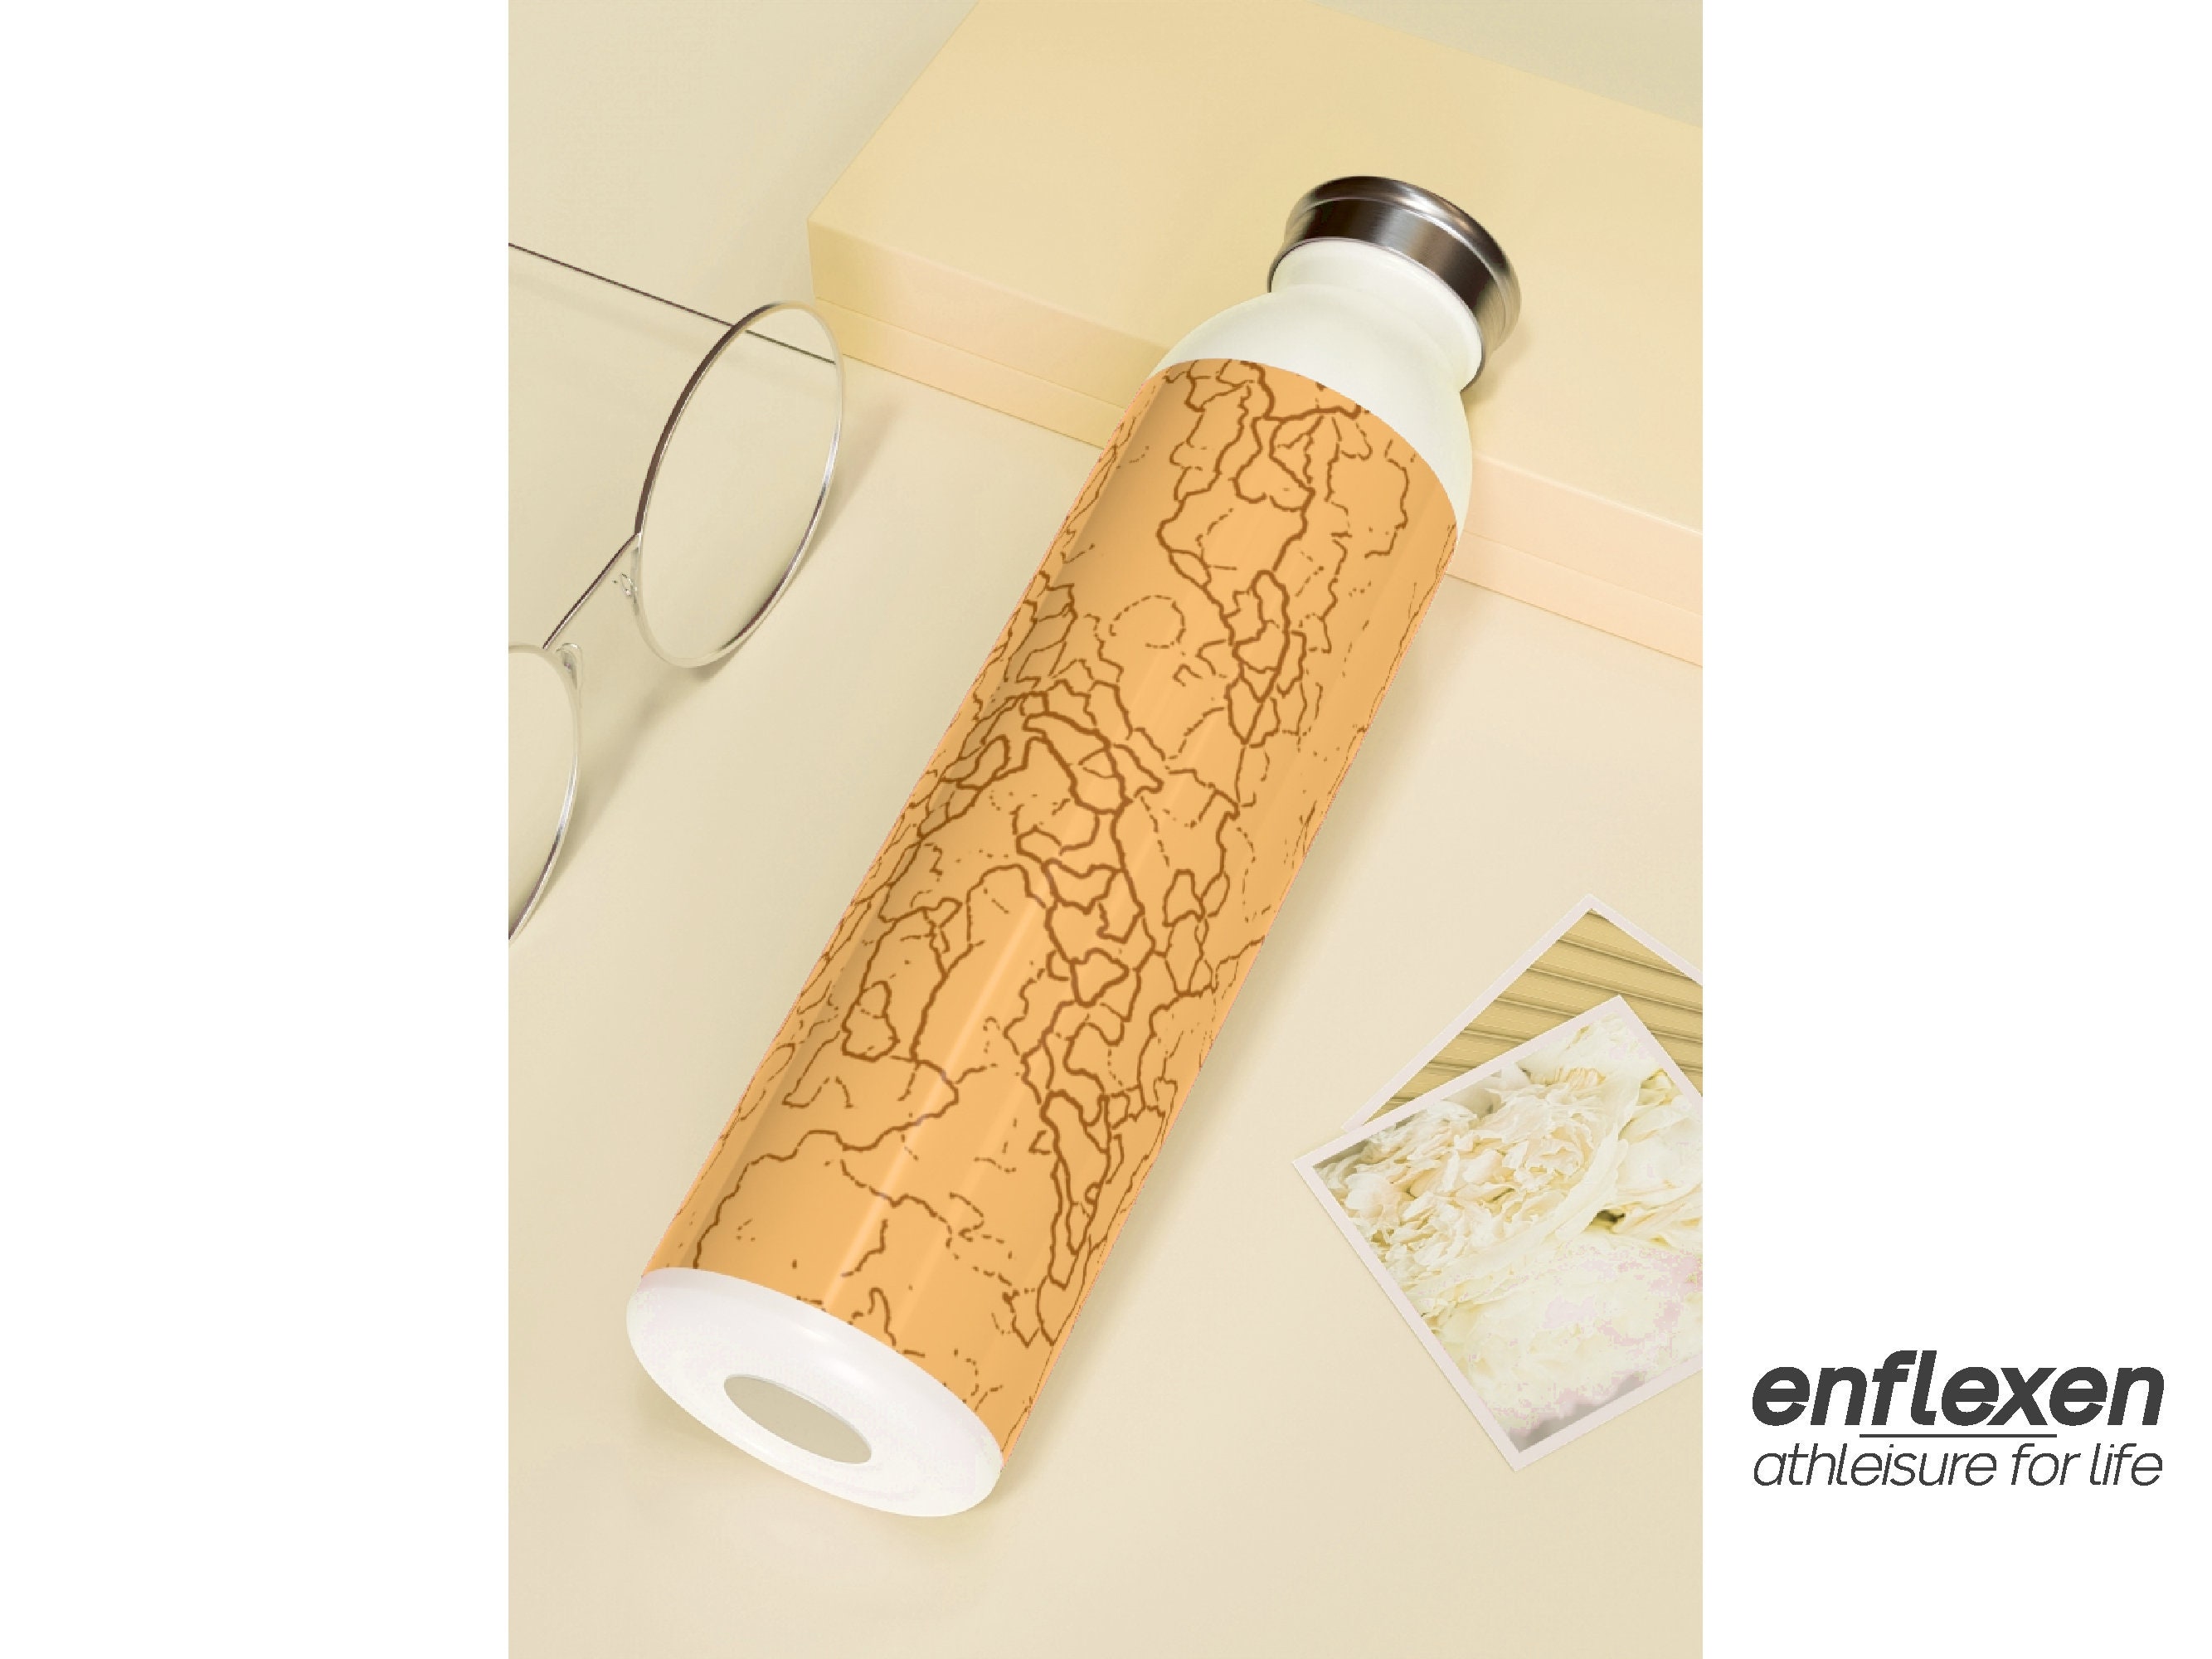 20 Oz Cream and Caramel Hydroflask, Beige and Brown Insulated Thermal  Hydration Flask, Creamy Beige Gym Workout Water Bottle 